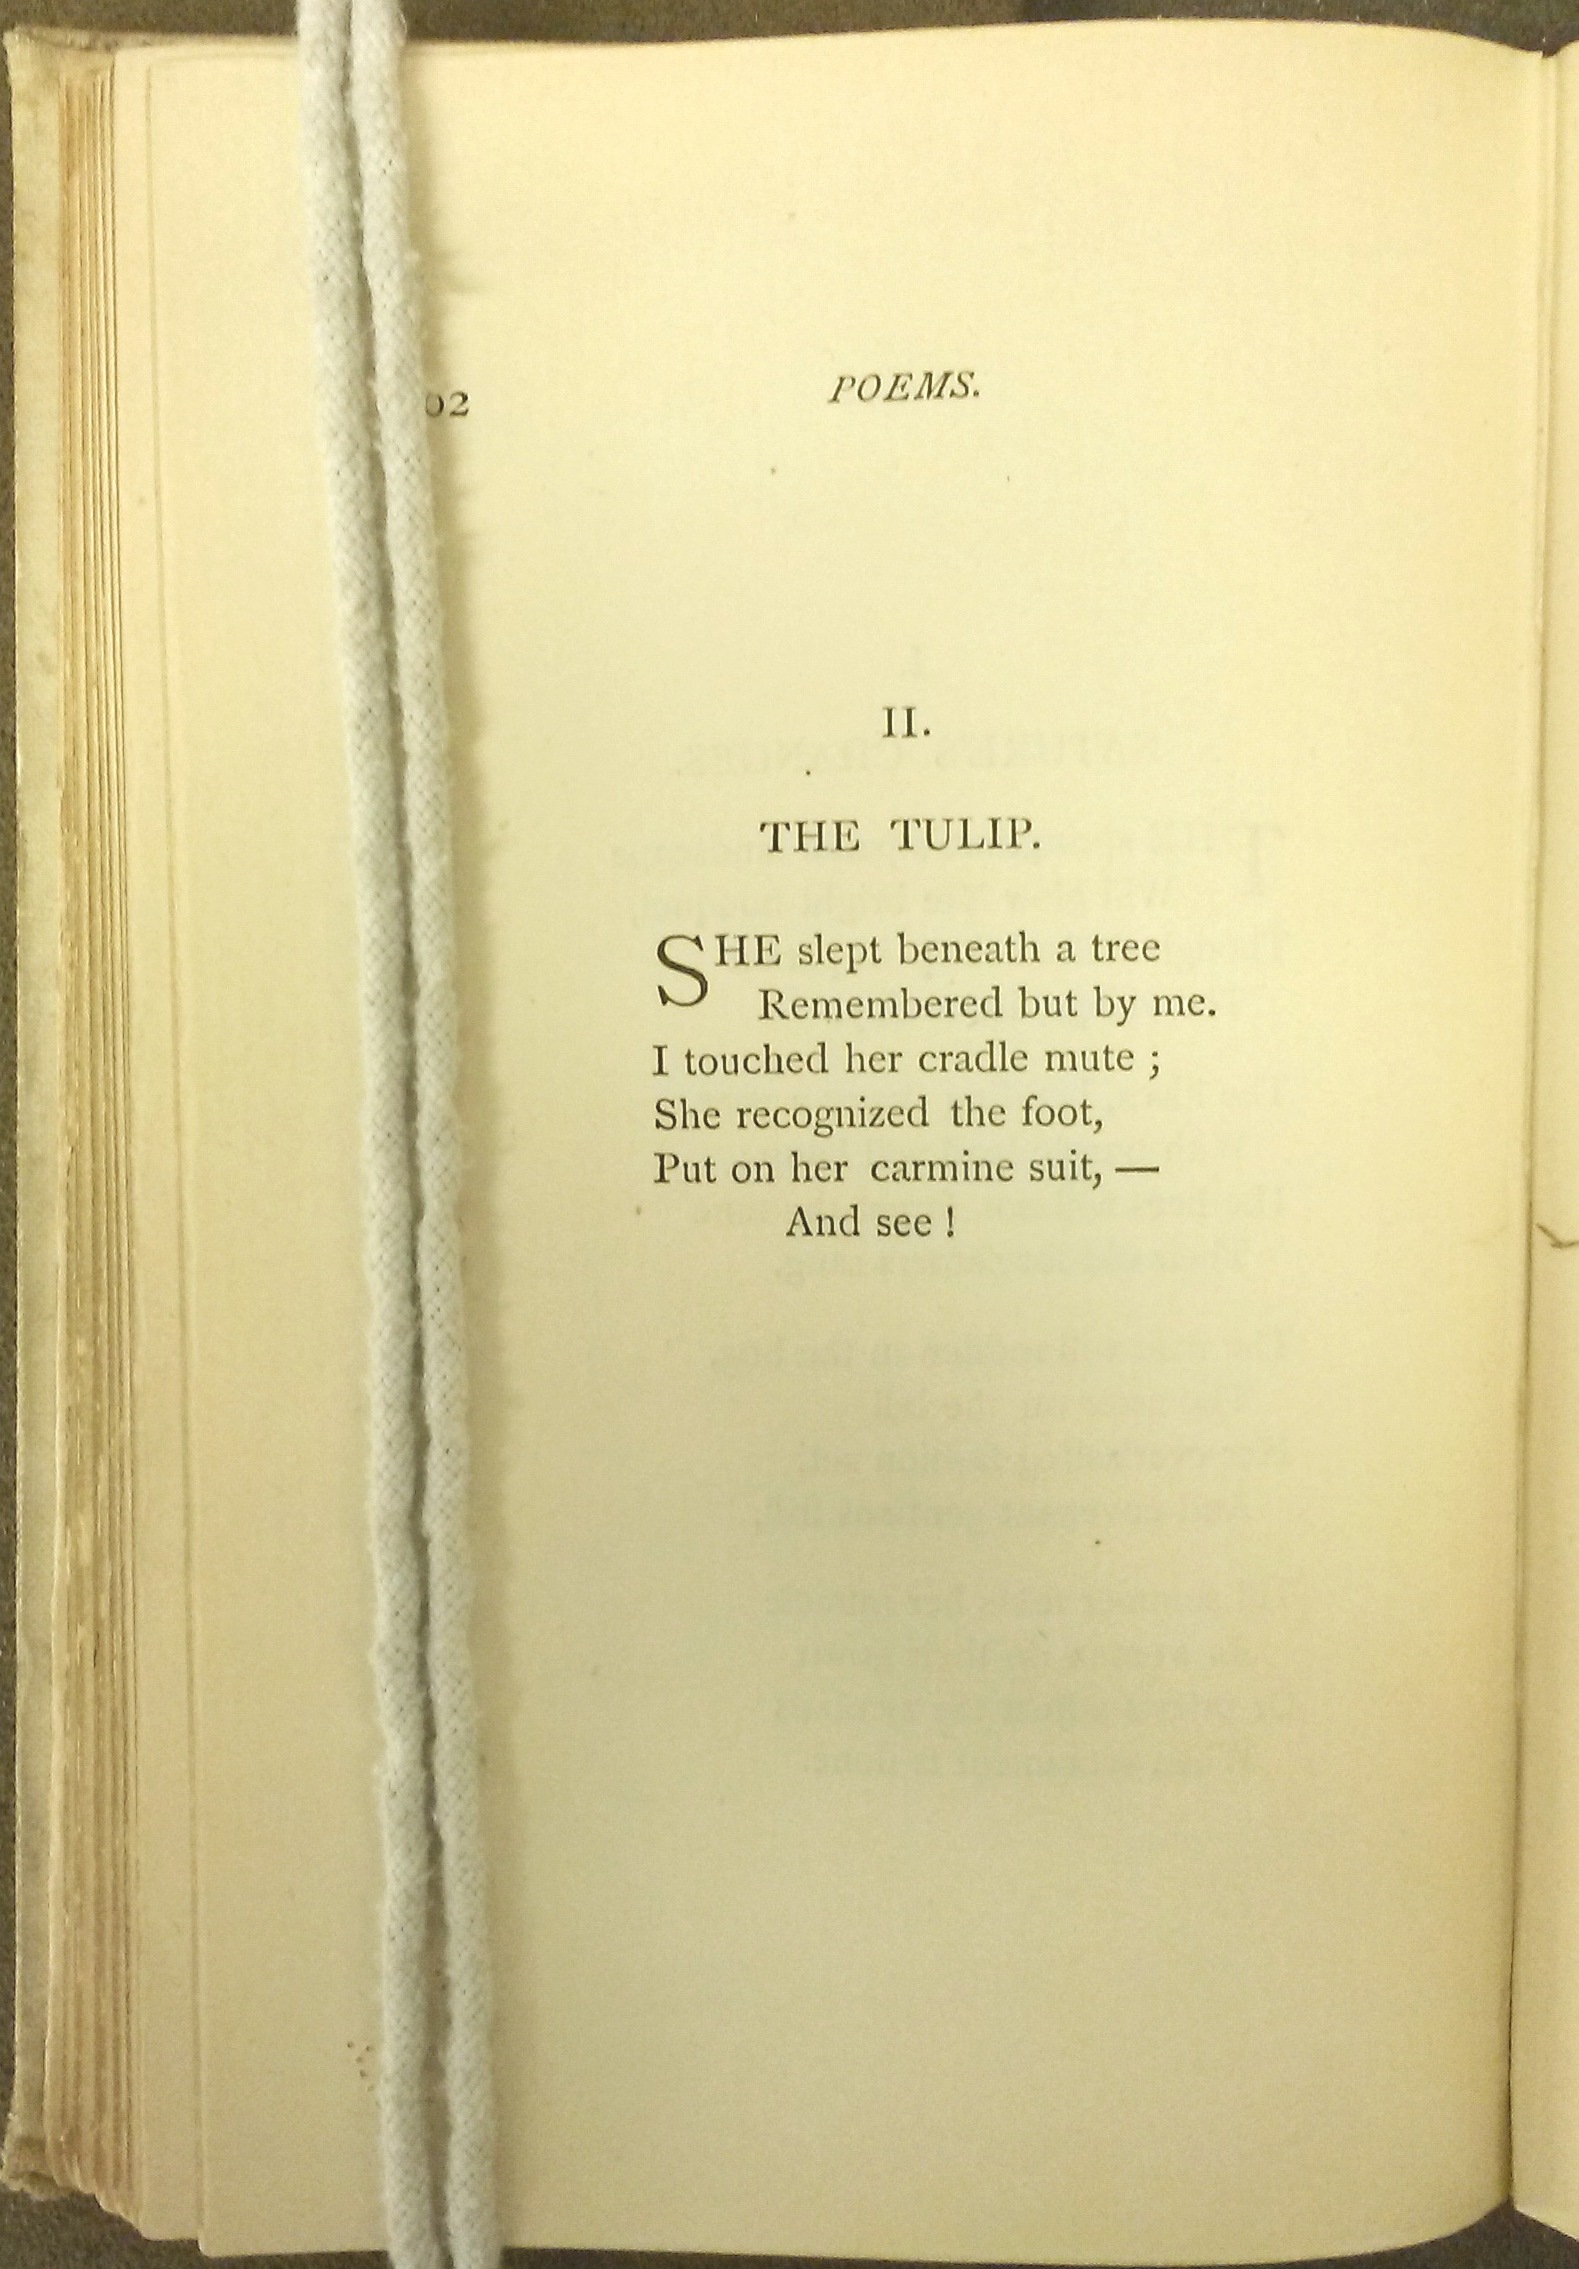 Text of "The Tulip"